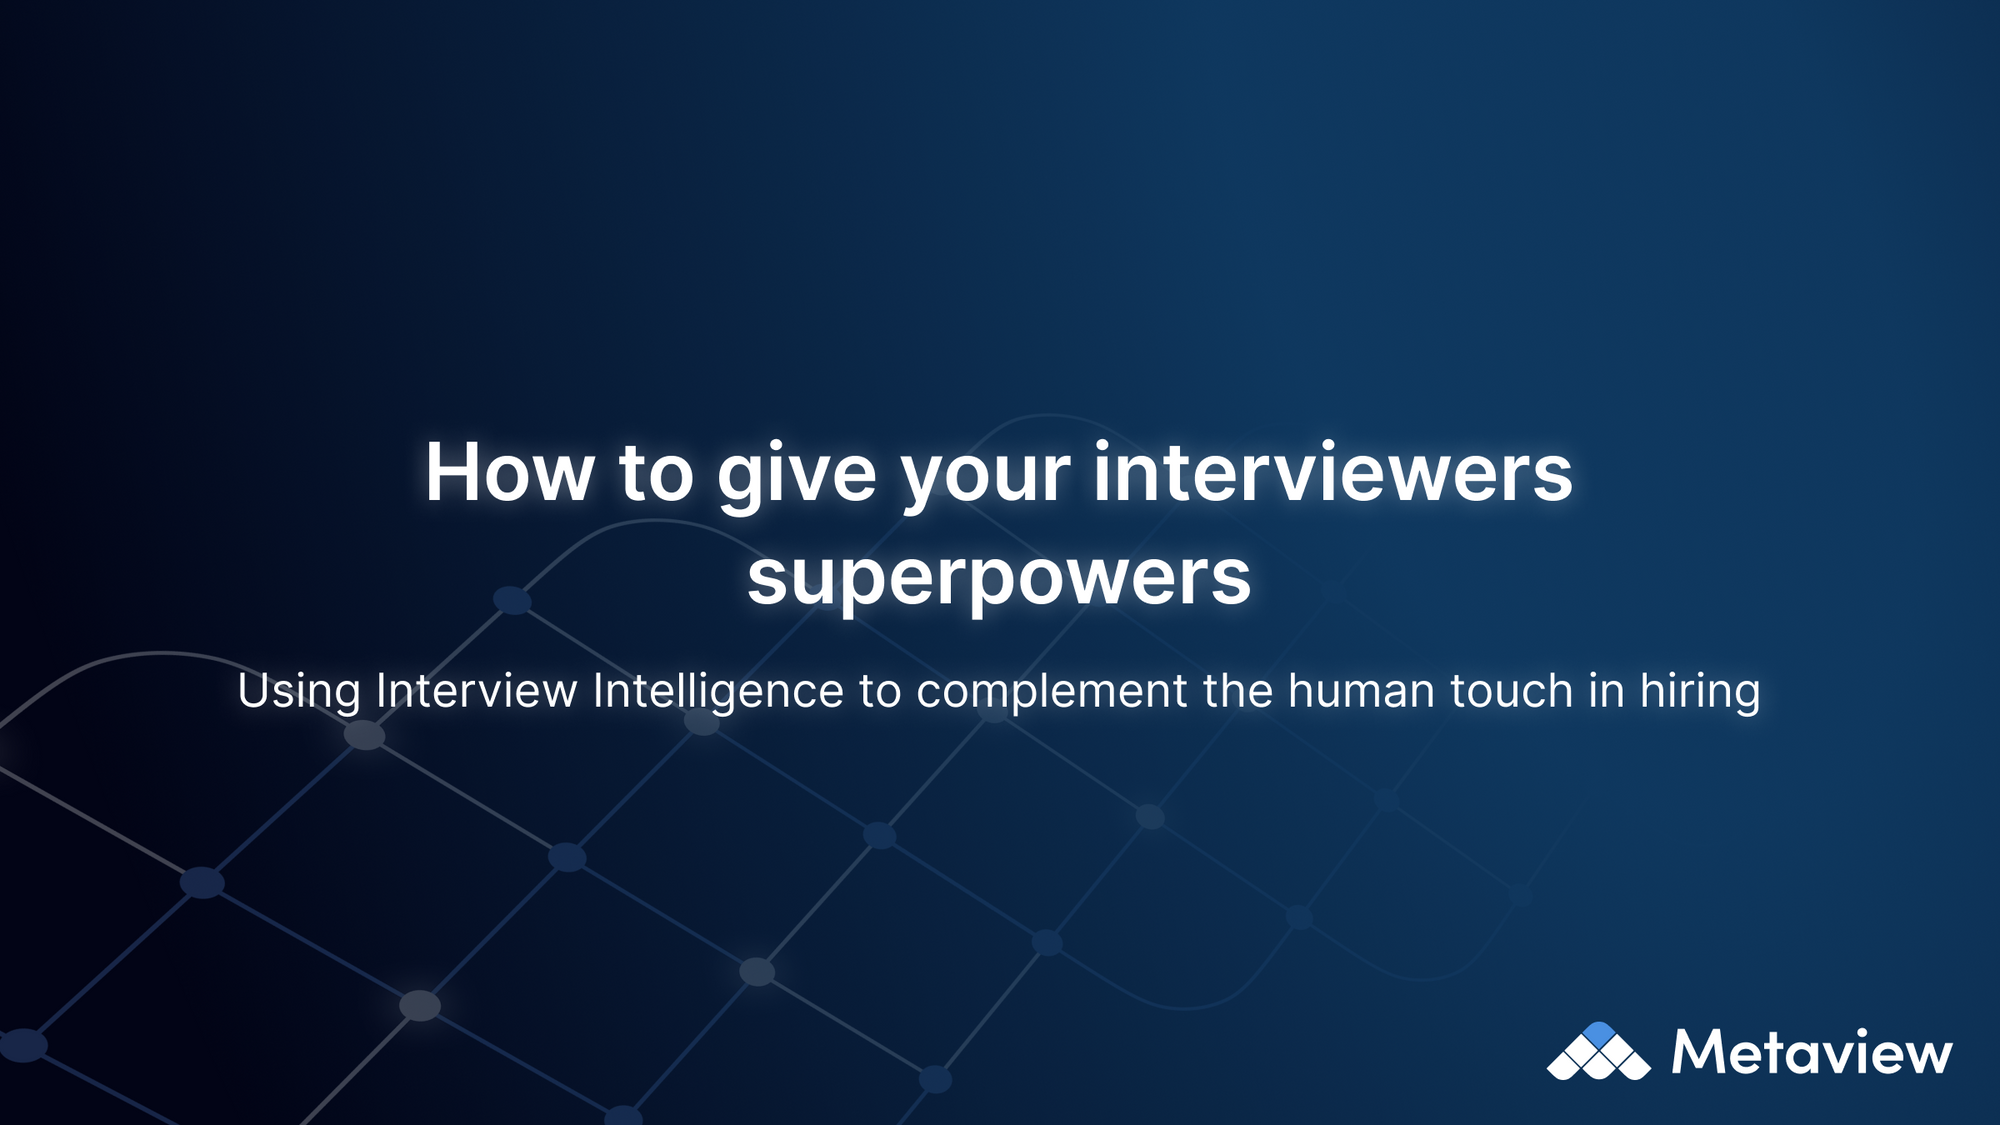 Using Interview Intelligence to complement the human touch in hiring